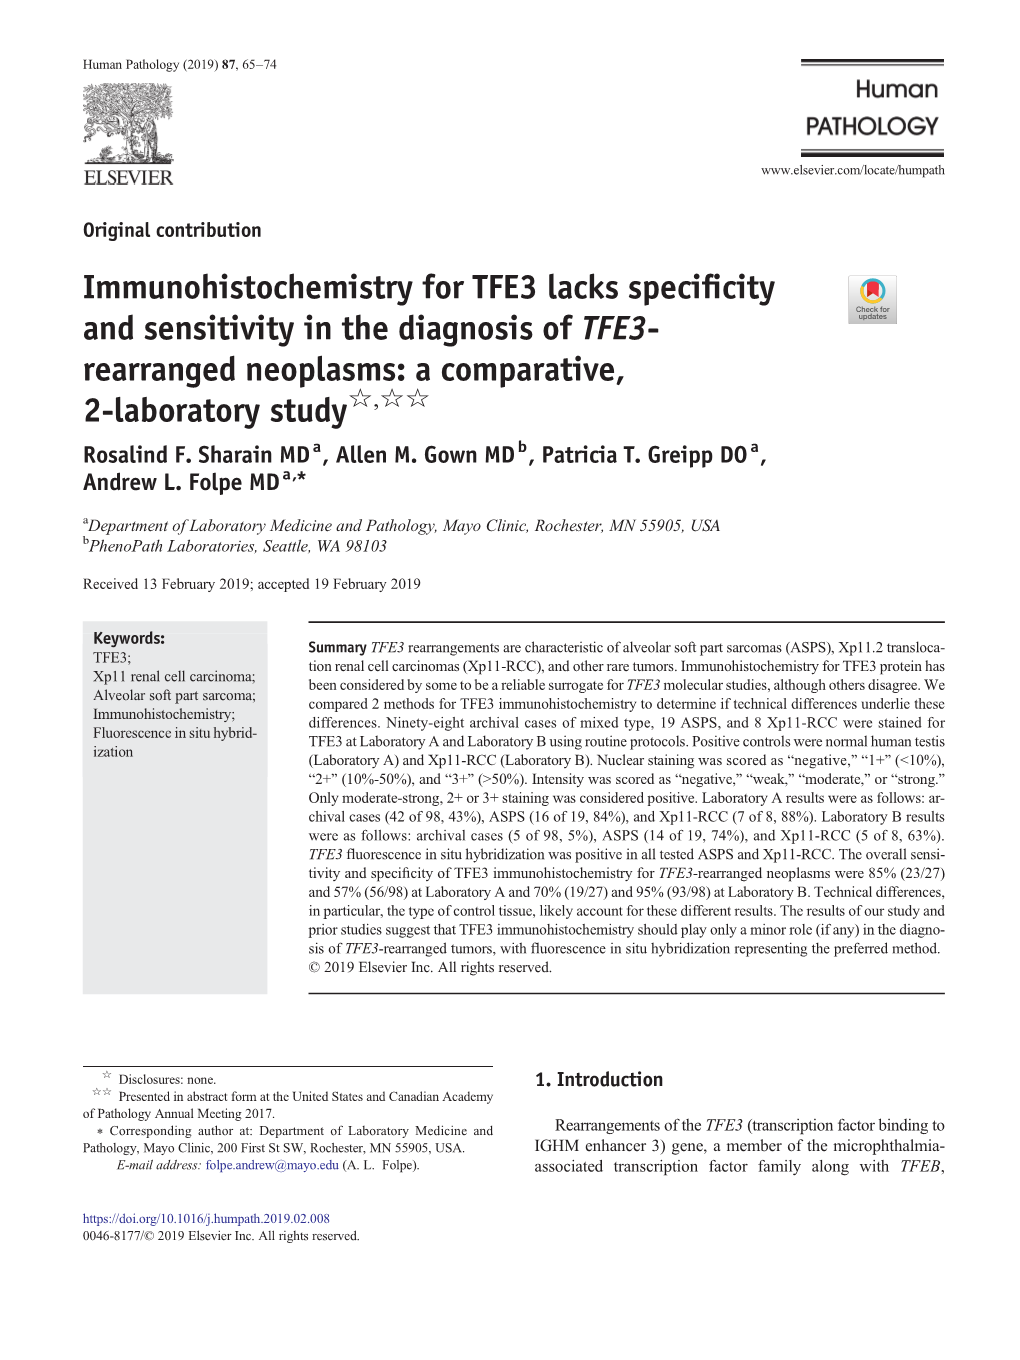 Immunohistochemistry for TFE3 Lacks Specificity and Sensitivity in The